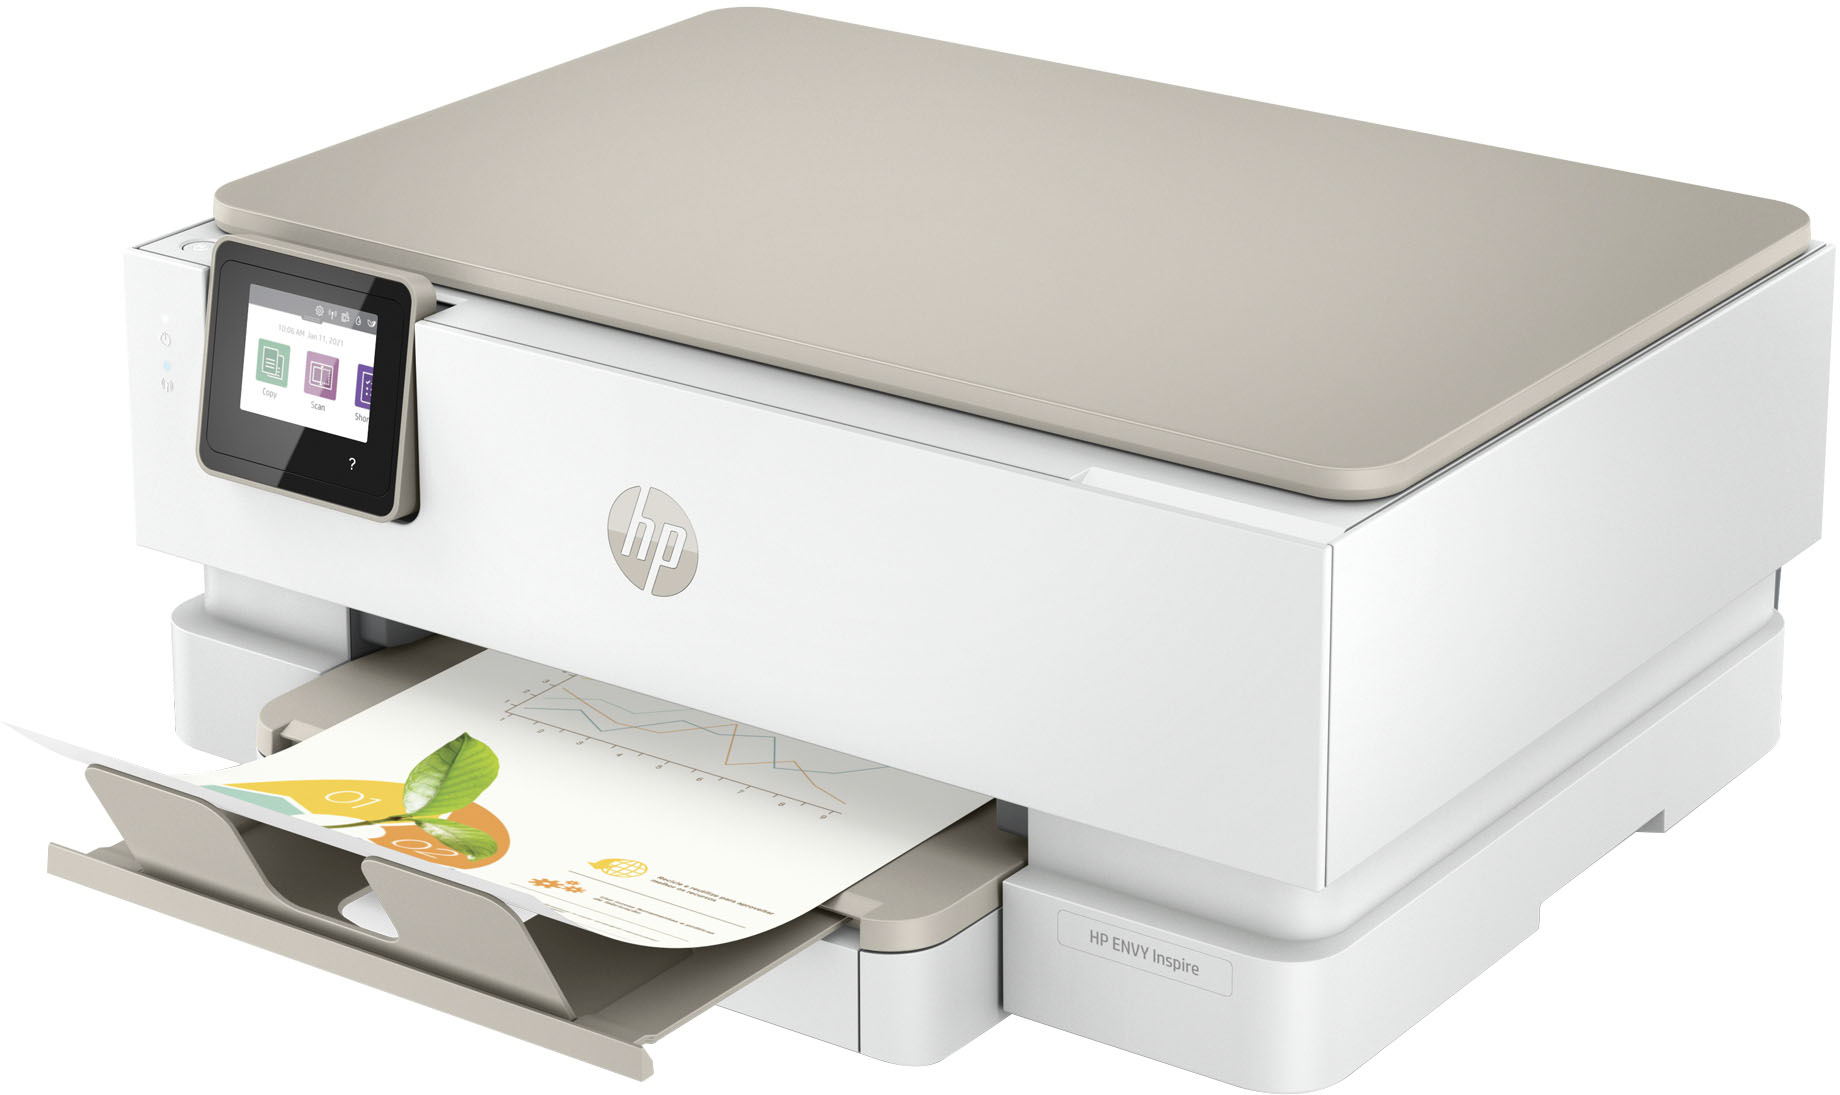 Angle View: HP - ENVY Inspire 7255e Wireless All-In-One Inkjet Photo Printer with 3 months of Instant Ink included with HP+ - White & Sandstone